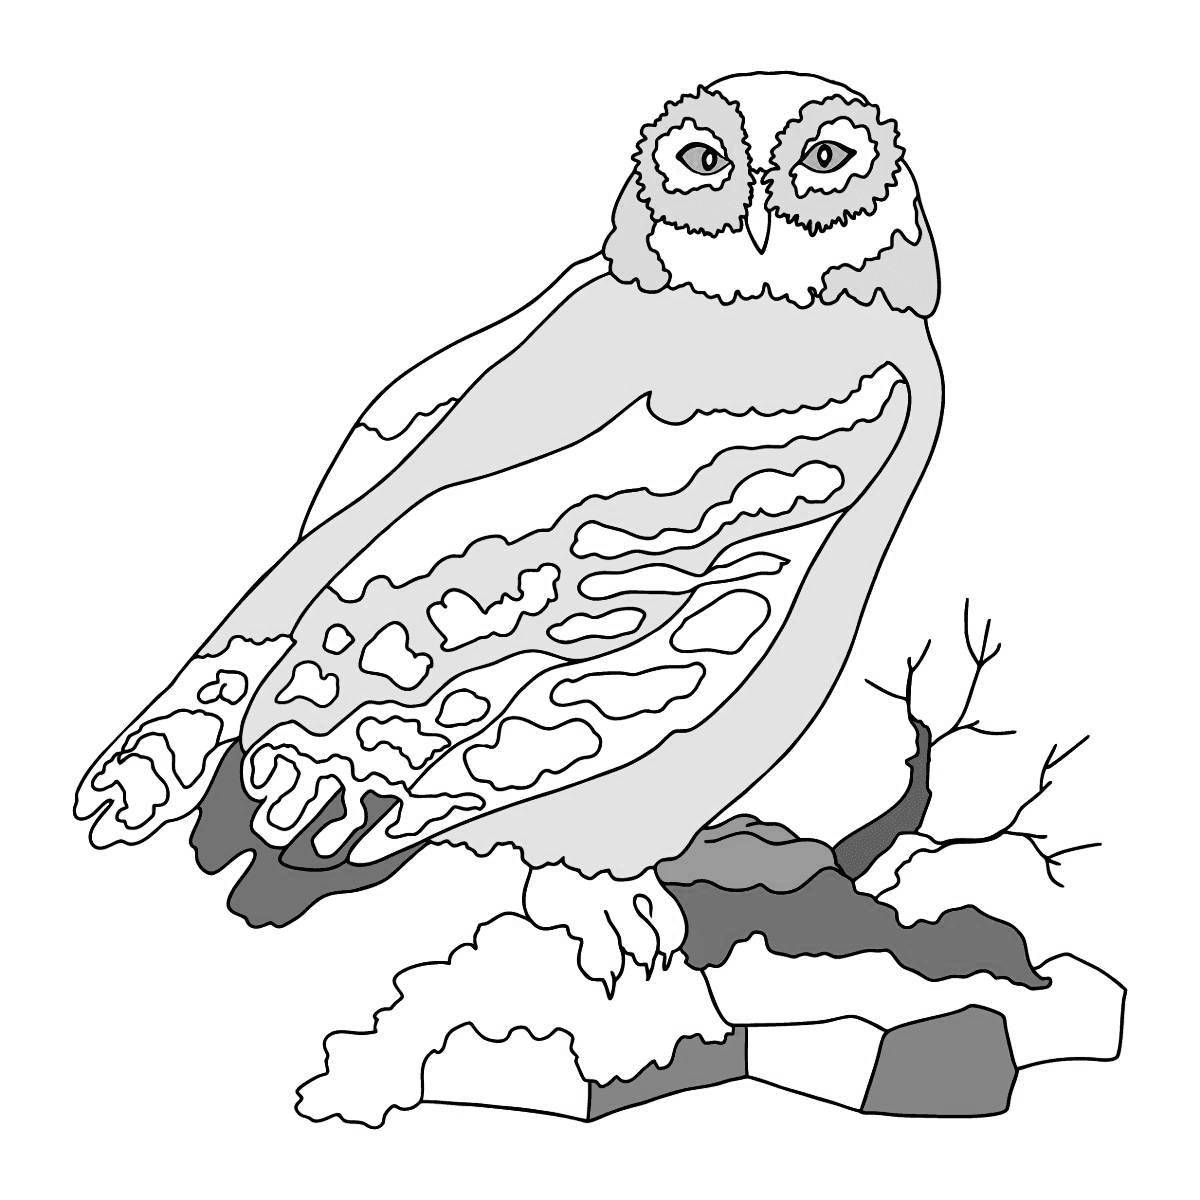 Adorable white owl coloring page